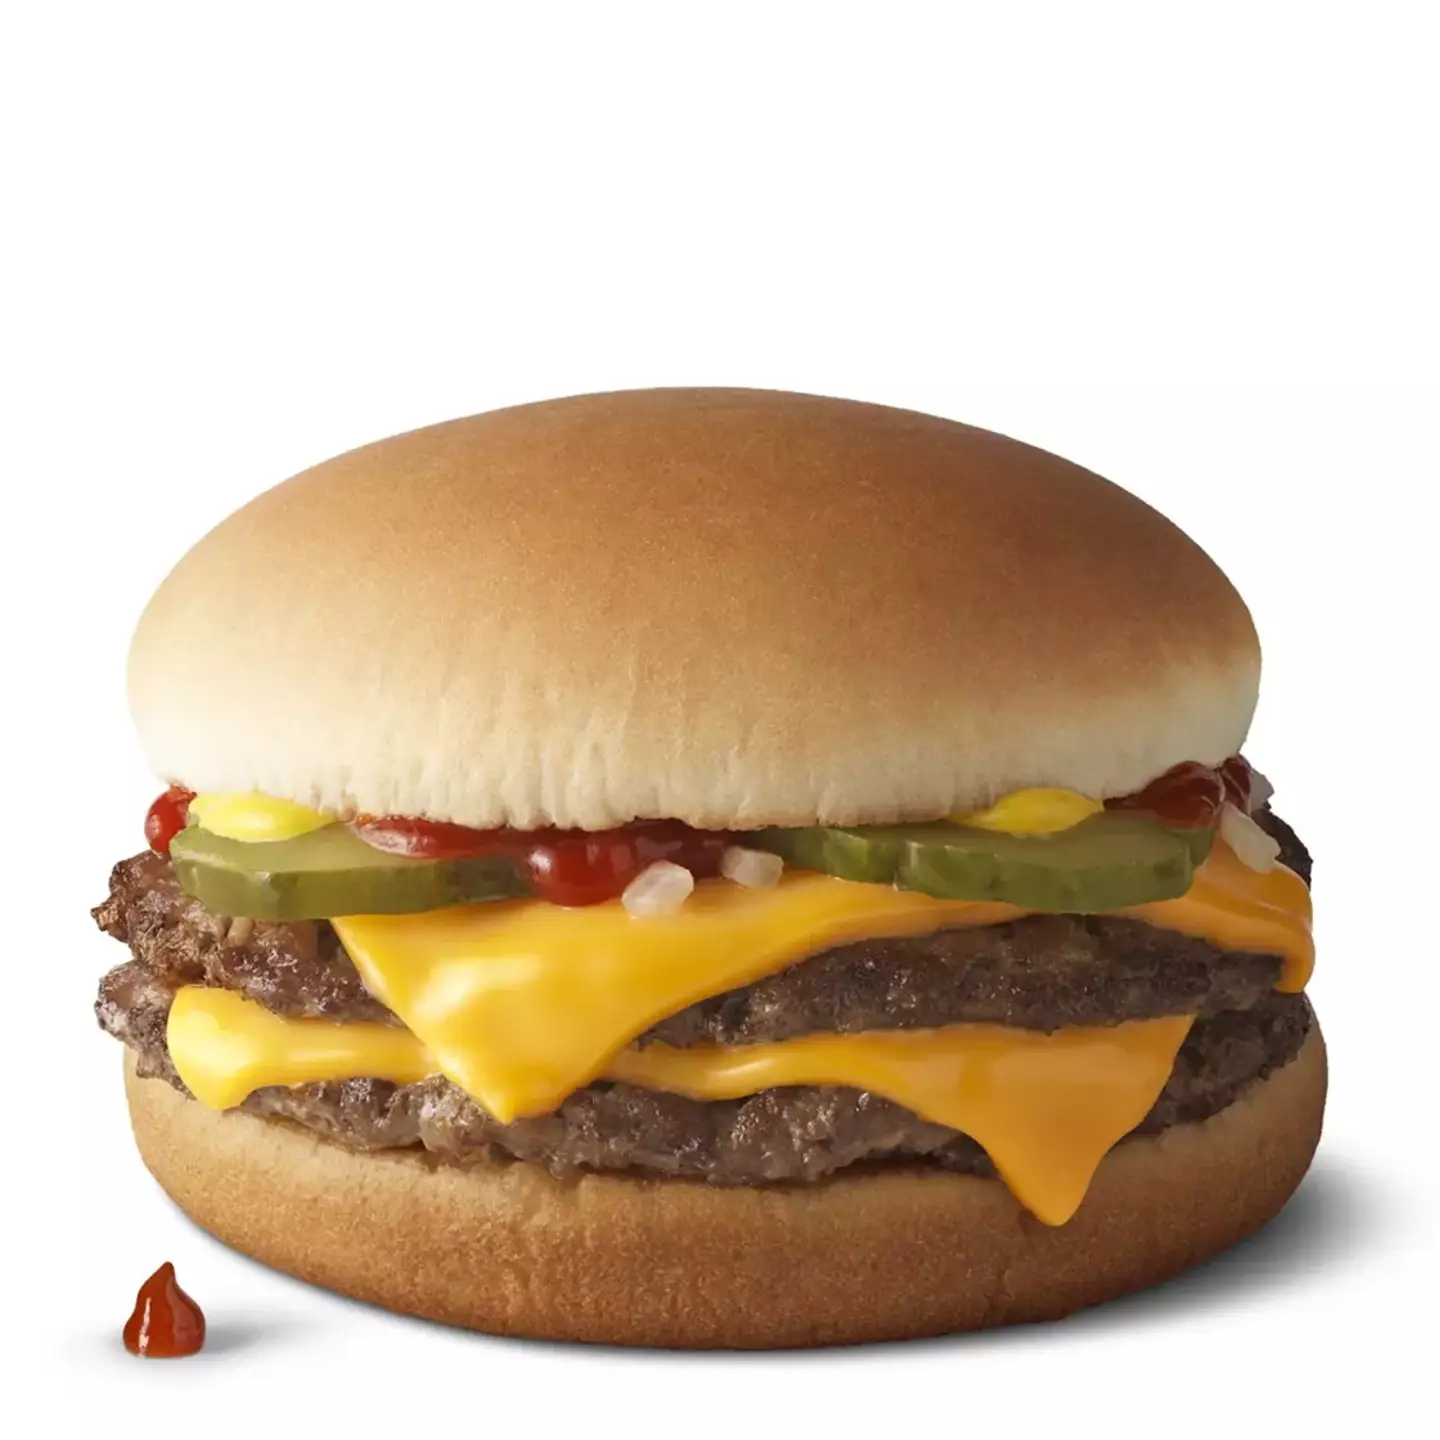 McDonald's fans get Double Cheeseburgers for only $0.50.